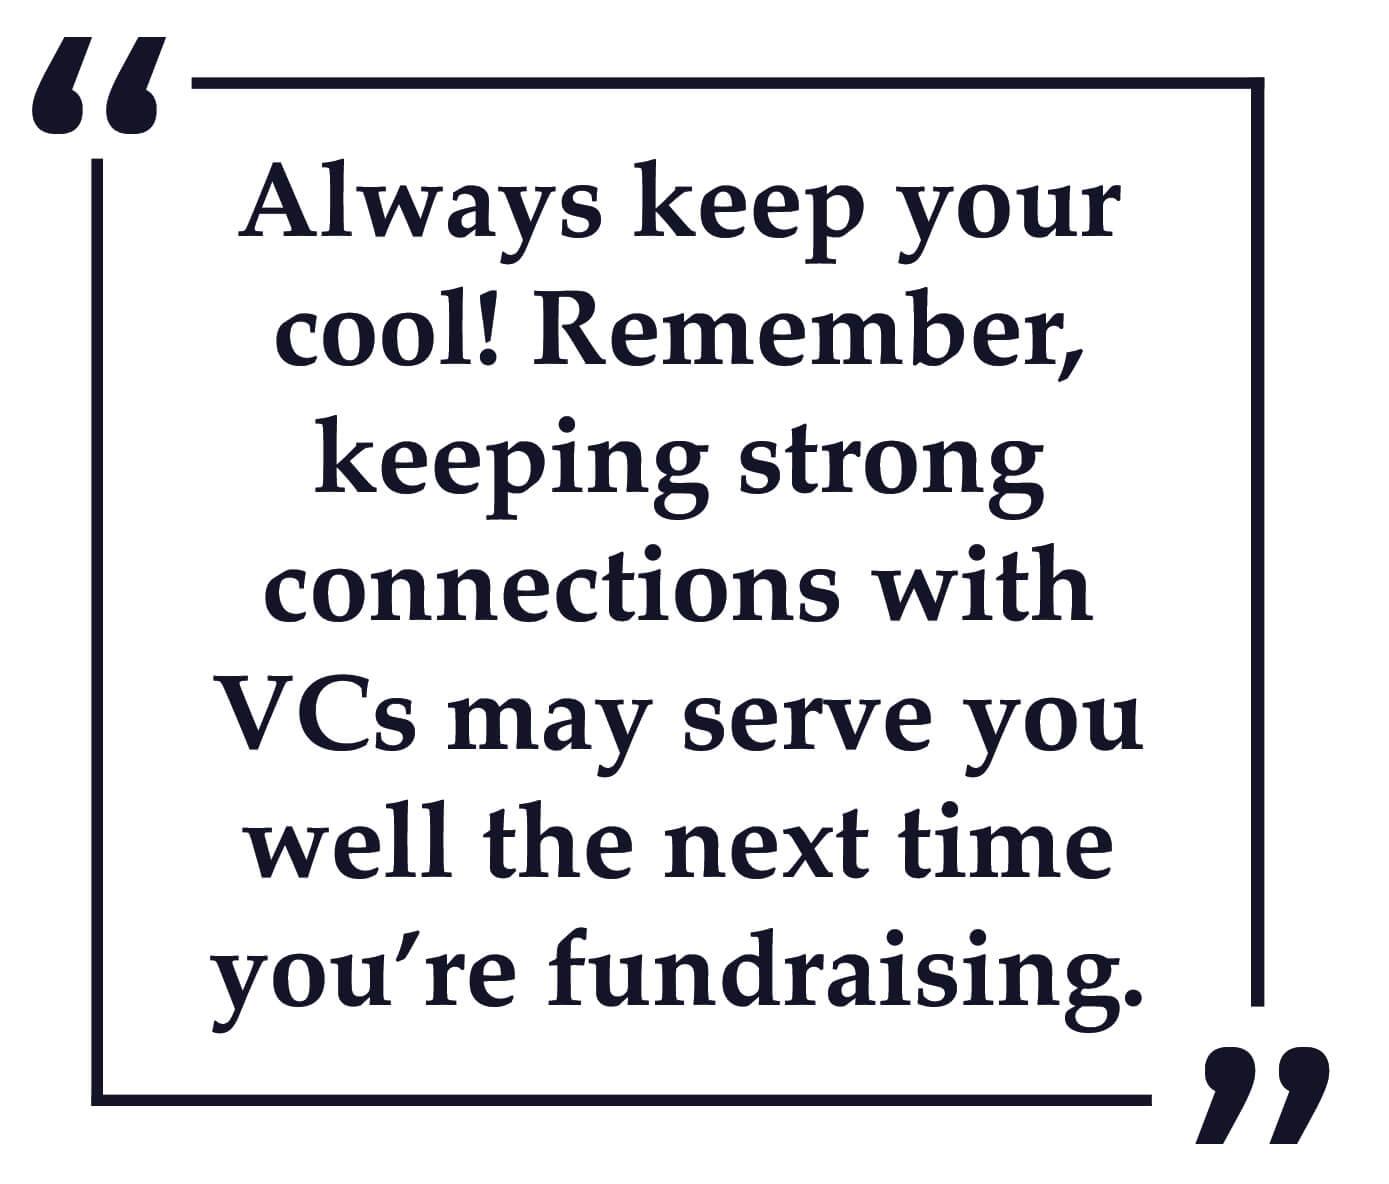 "Always keep your cool! Remember, keeping strong connections with VCs mayh serve you well the next time you're fundraising" - Gigi Levy-Weiss quote